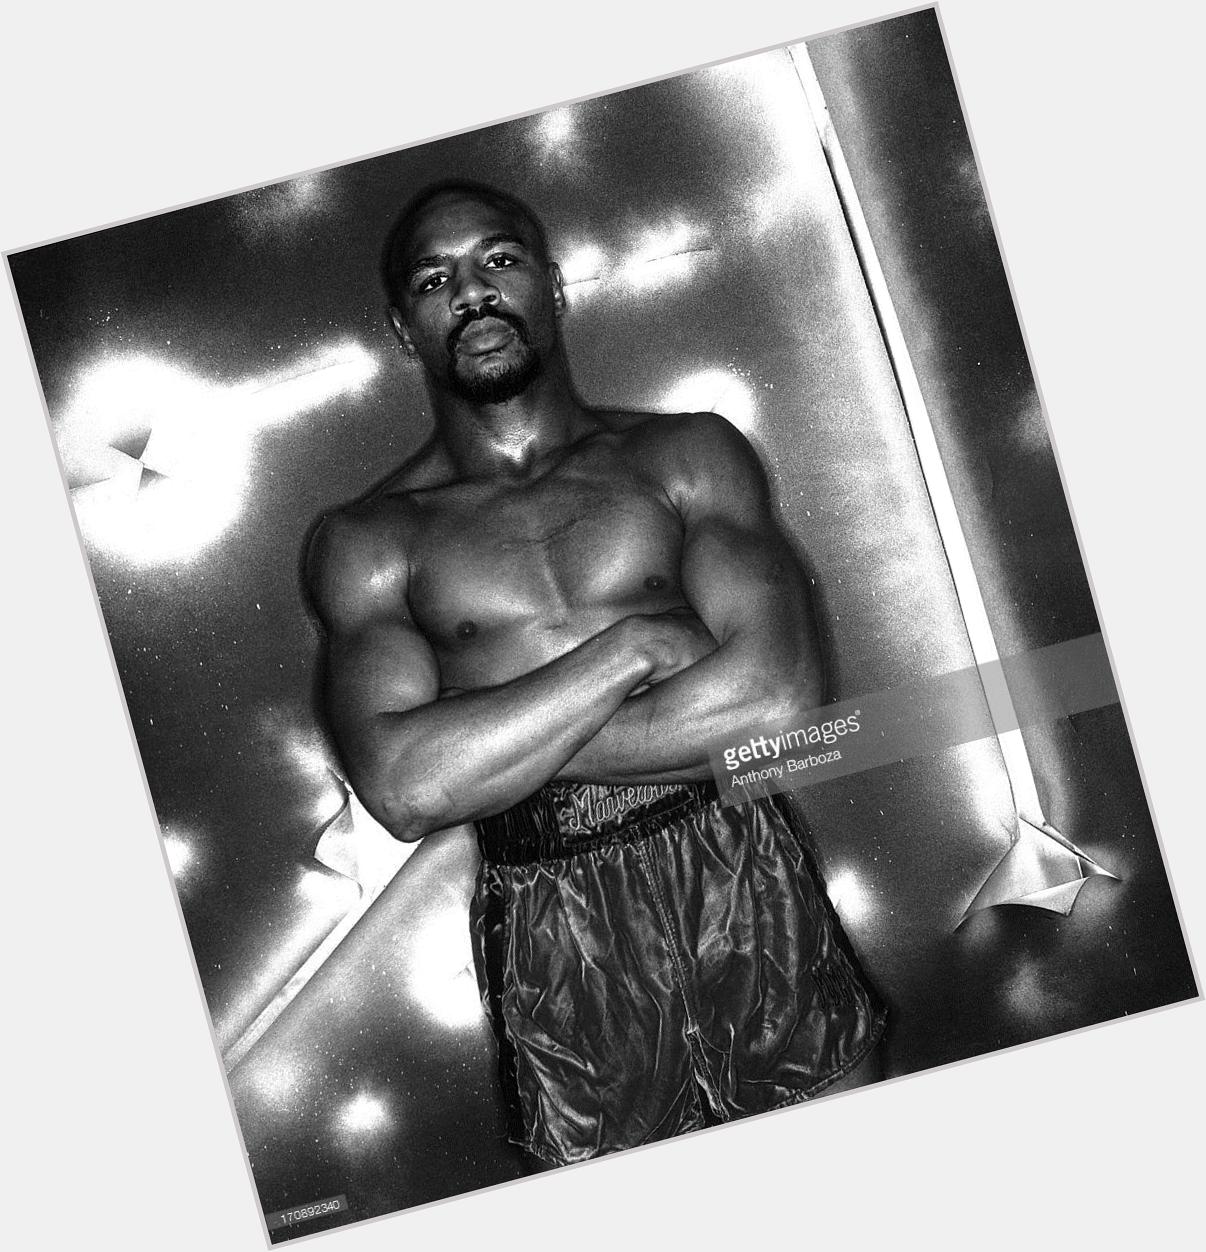 Happy Birthday to one of the baddest men to ever walk the face of the planet Marvelous Marvin Hagler 